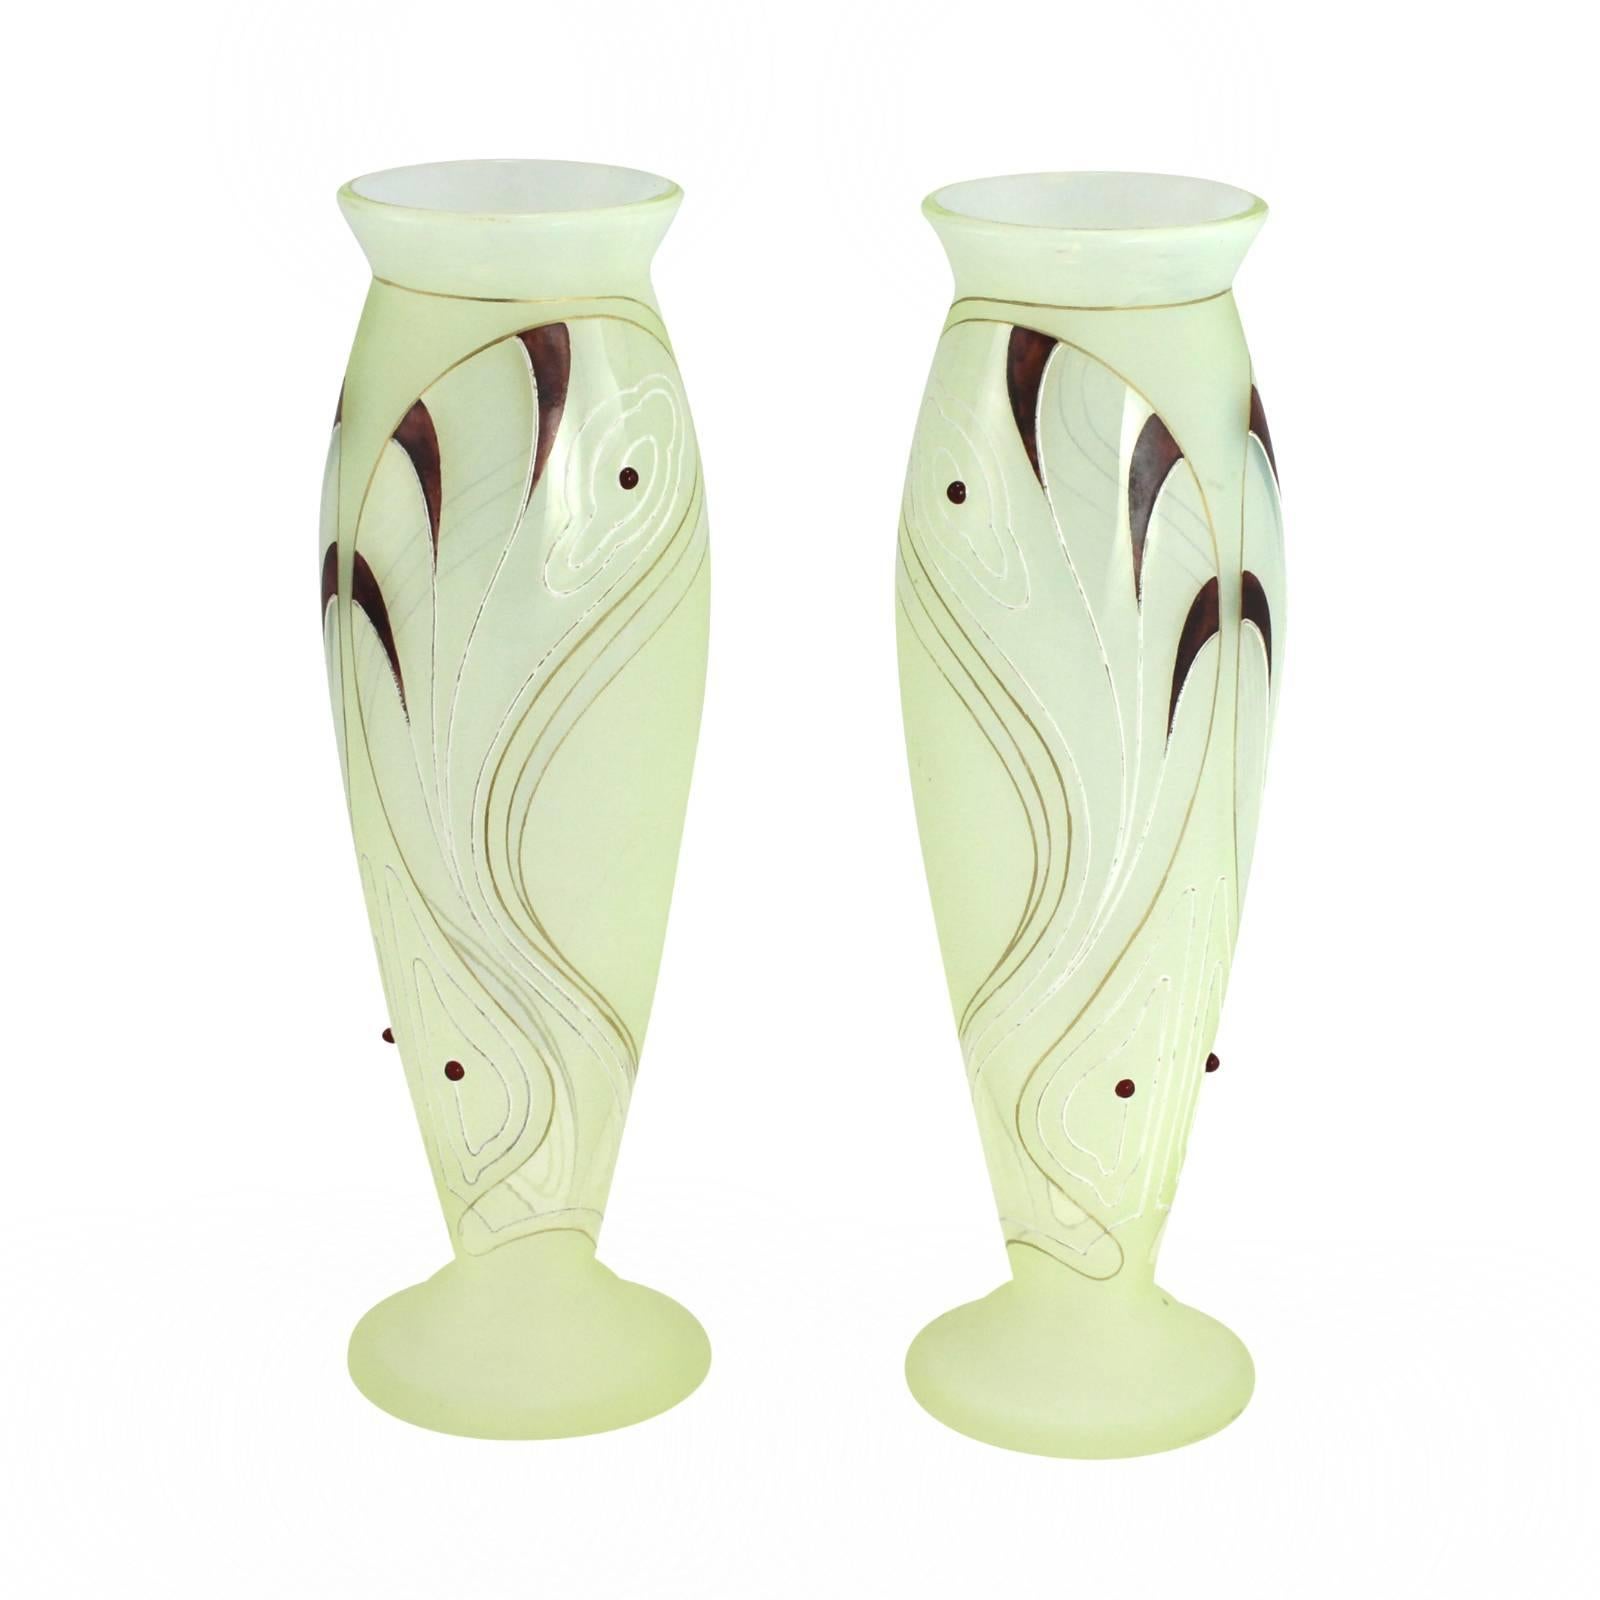 A fine pair of art glass vases in the Art Nouveau taste. They feature a whiplash pattern in burgundy enamel on a uranium glass base with Riedel's signature applied glass jewels.

Today Riedel Glass is especially famous for their contribution to